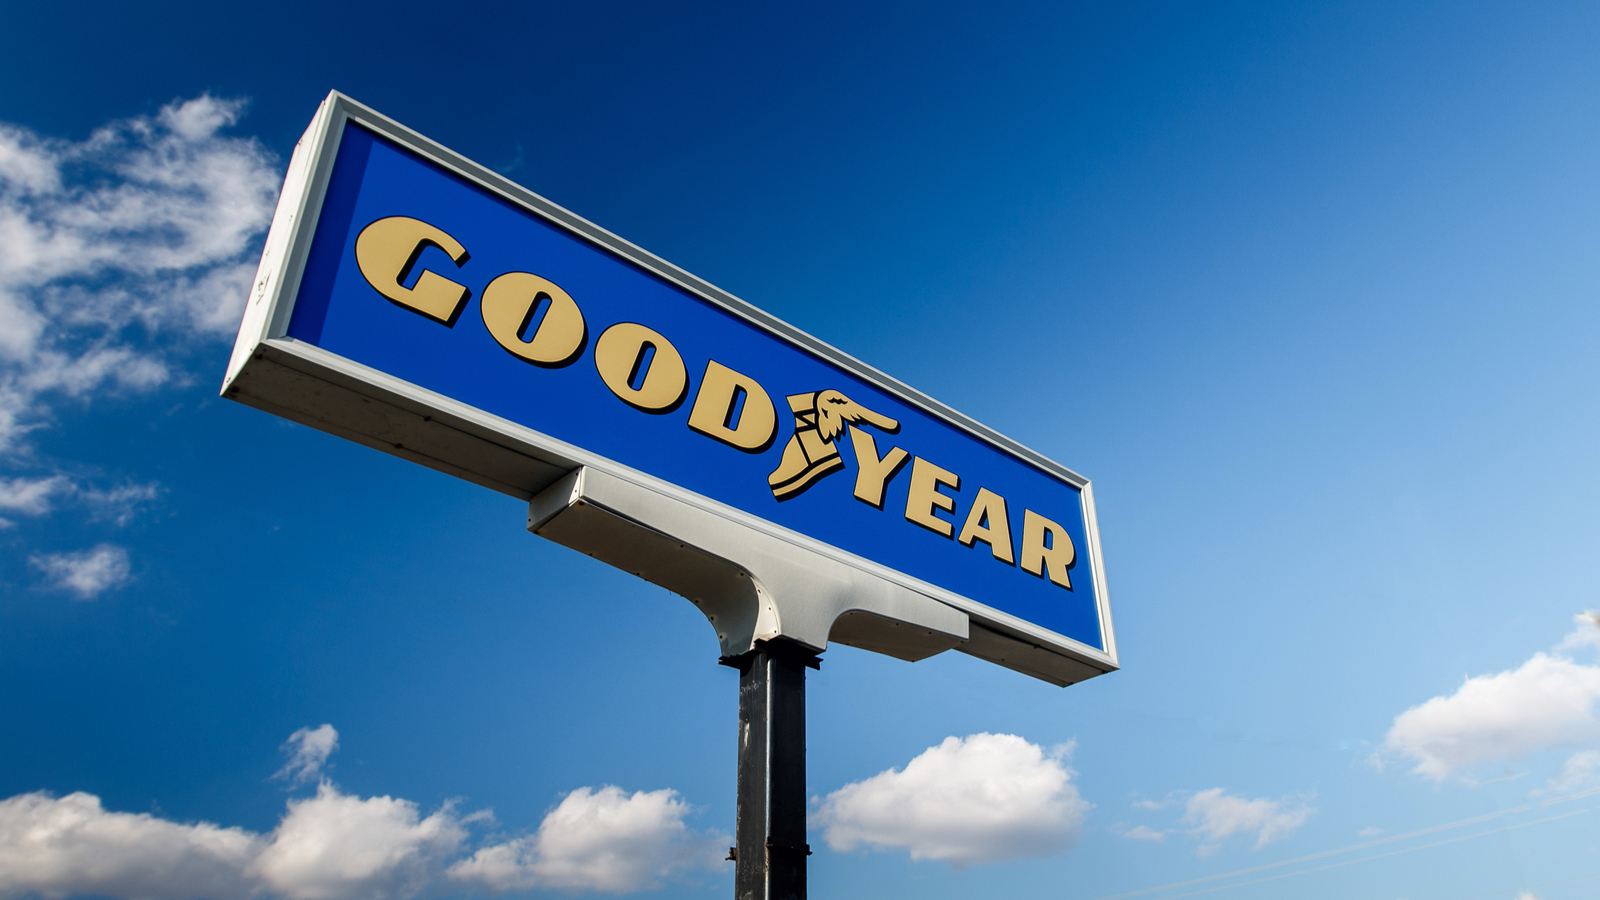 Best Goodyear Tire Coupons and Promo Codes - March 2023 - Car Talk